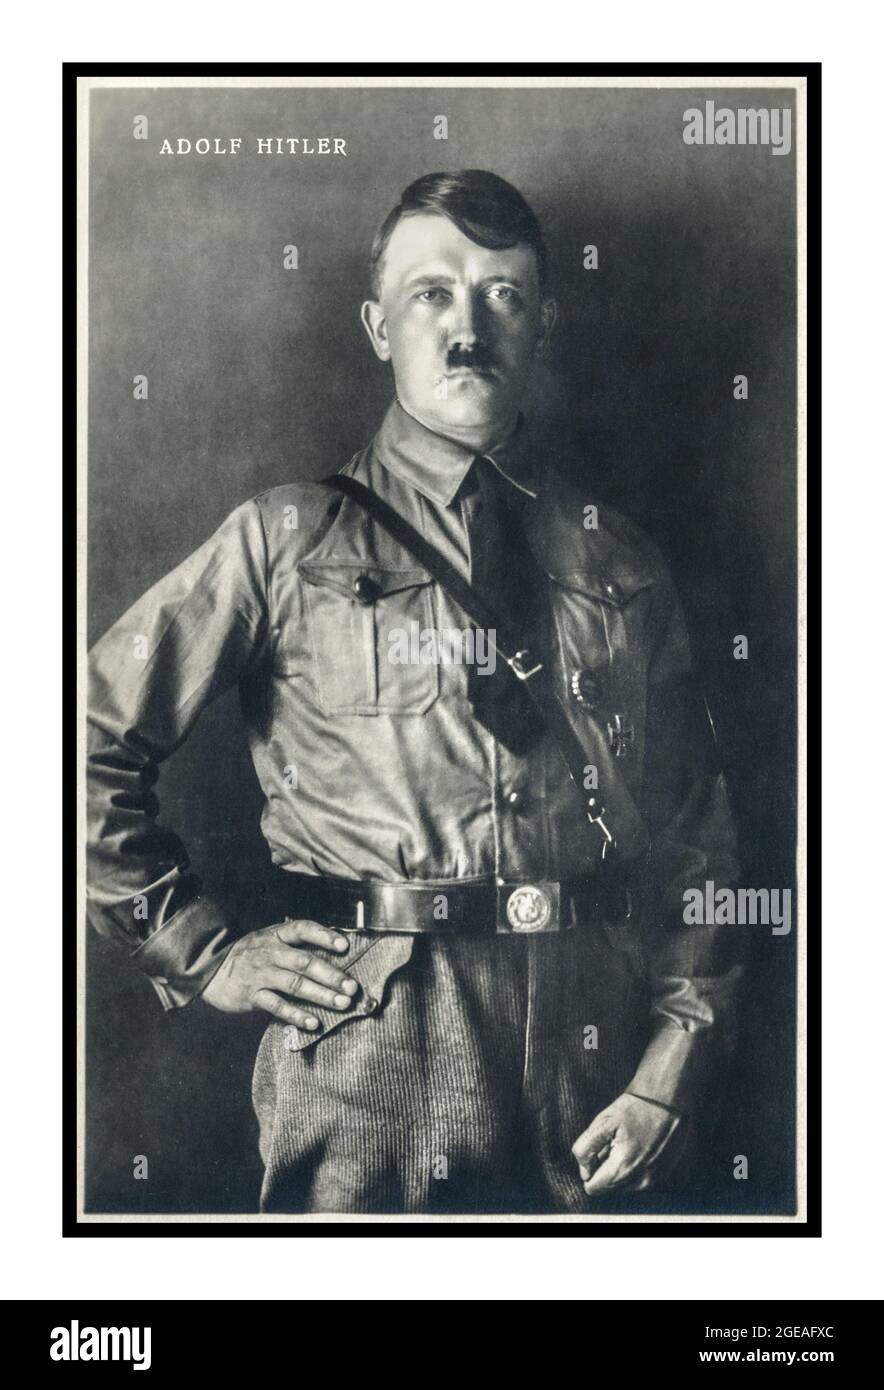 Adolf Hitler in NSDAP military uniform 1930s formal studio portrait by Hoffmann for propaganda election poster card Nazi Germany Stock Photo